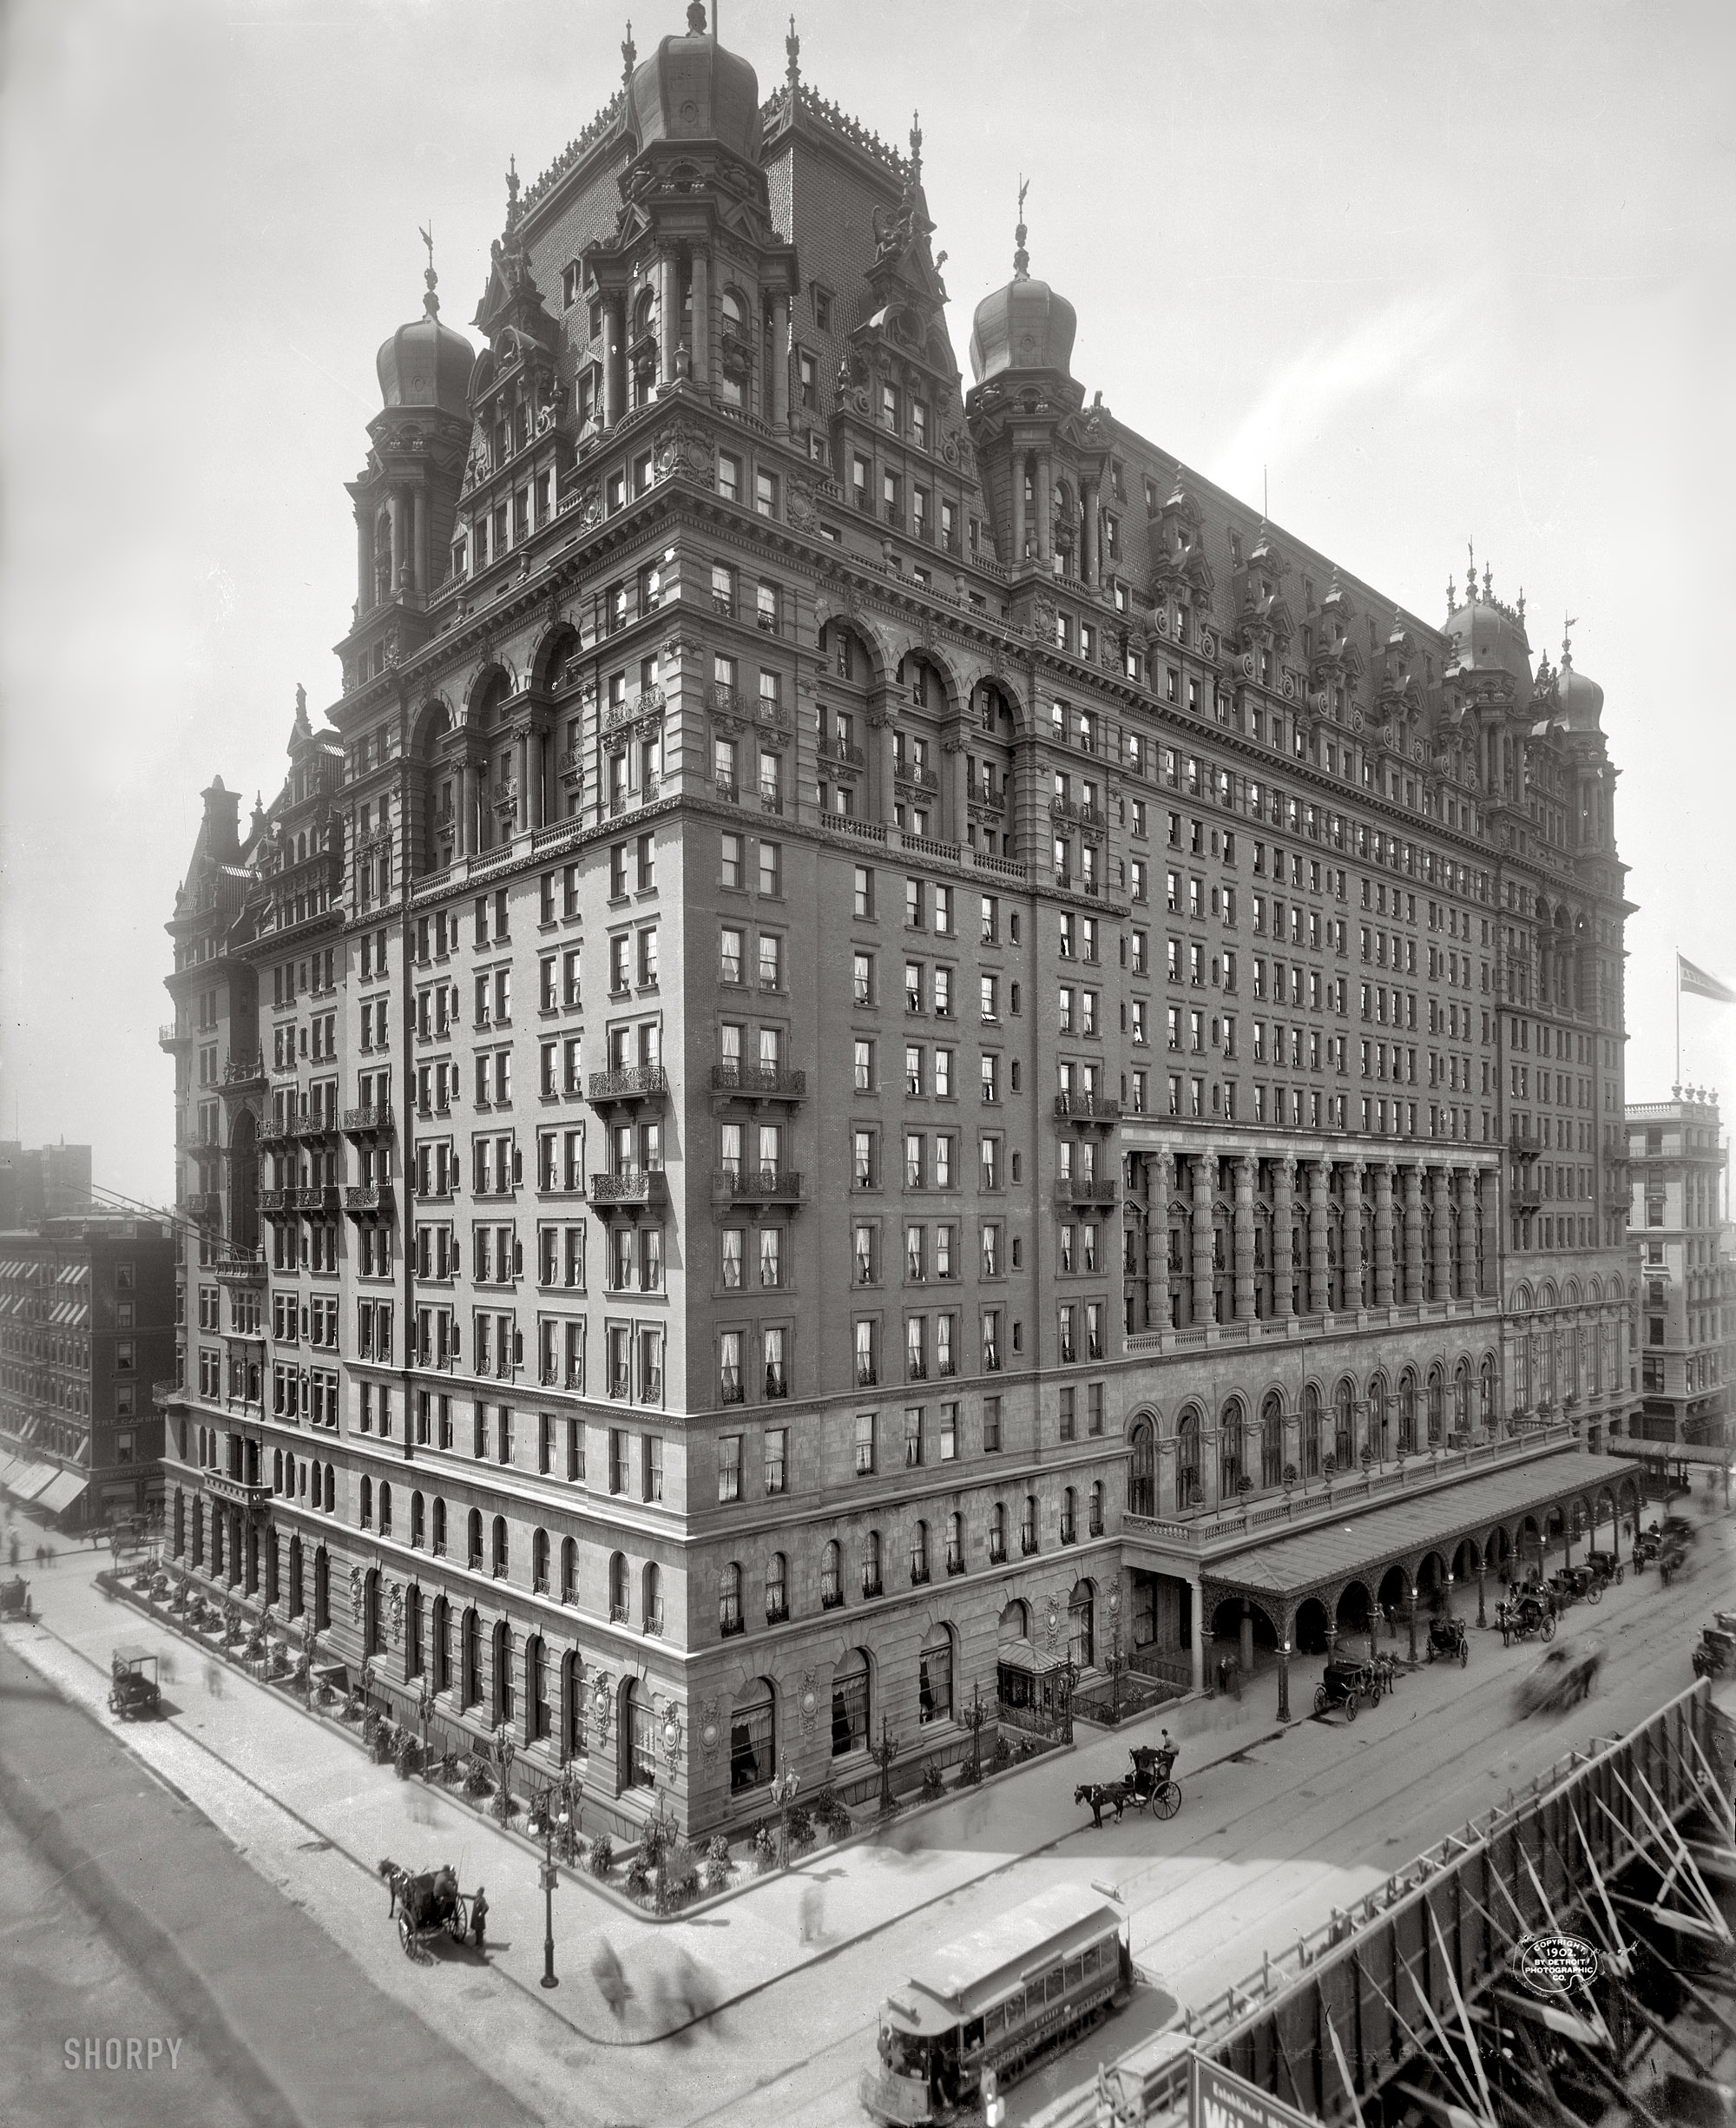 Circa 1902. "The Waldorf-Astoria, New York." The original, and somewhat forbidding, Waldorf at Fifth Avenue and 34th Street. Complete with the obligatory windowsill milk bottle. 8x10 inch dry plate glass negative, Detroit Photographic Company. View full size.